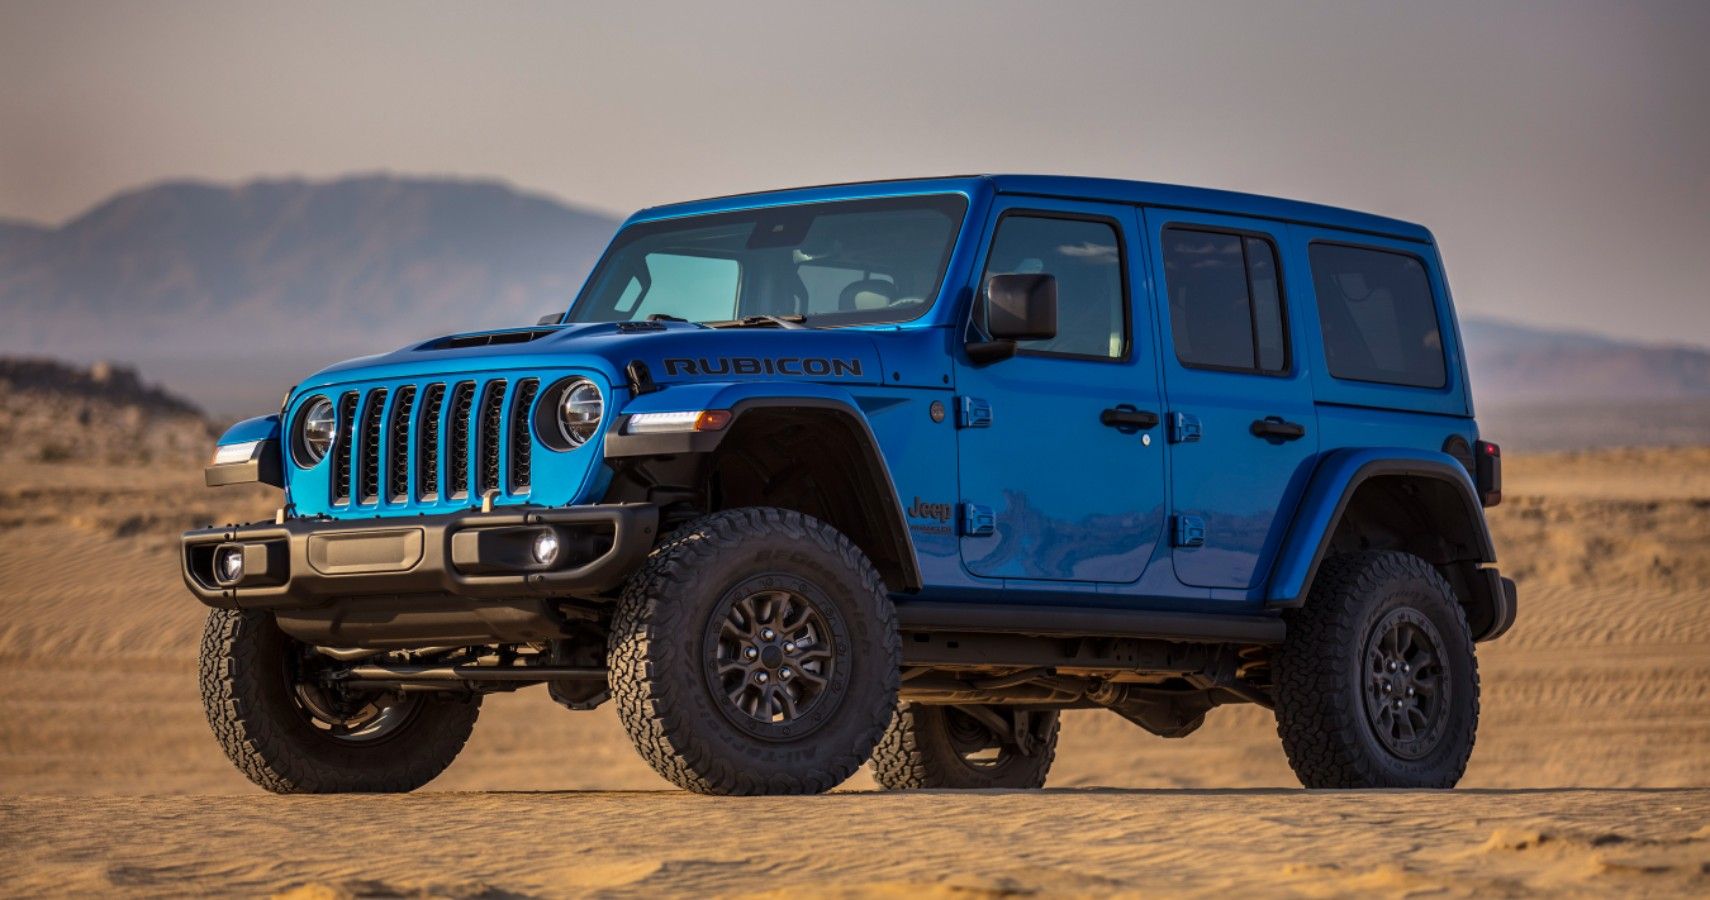 10 Fast Facts About The 20Year History Of The Jeep Wrangler Rubicon